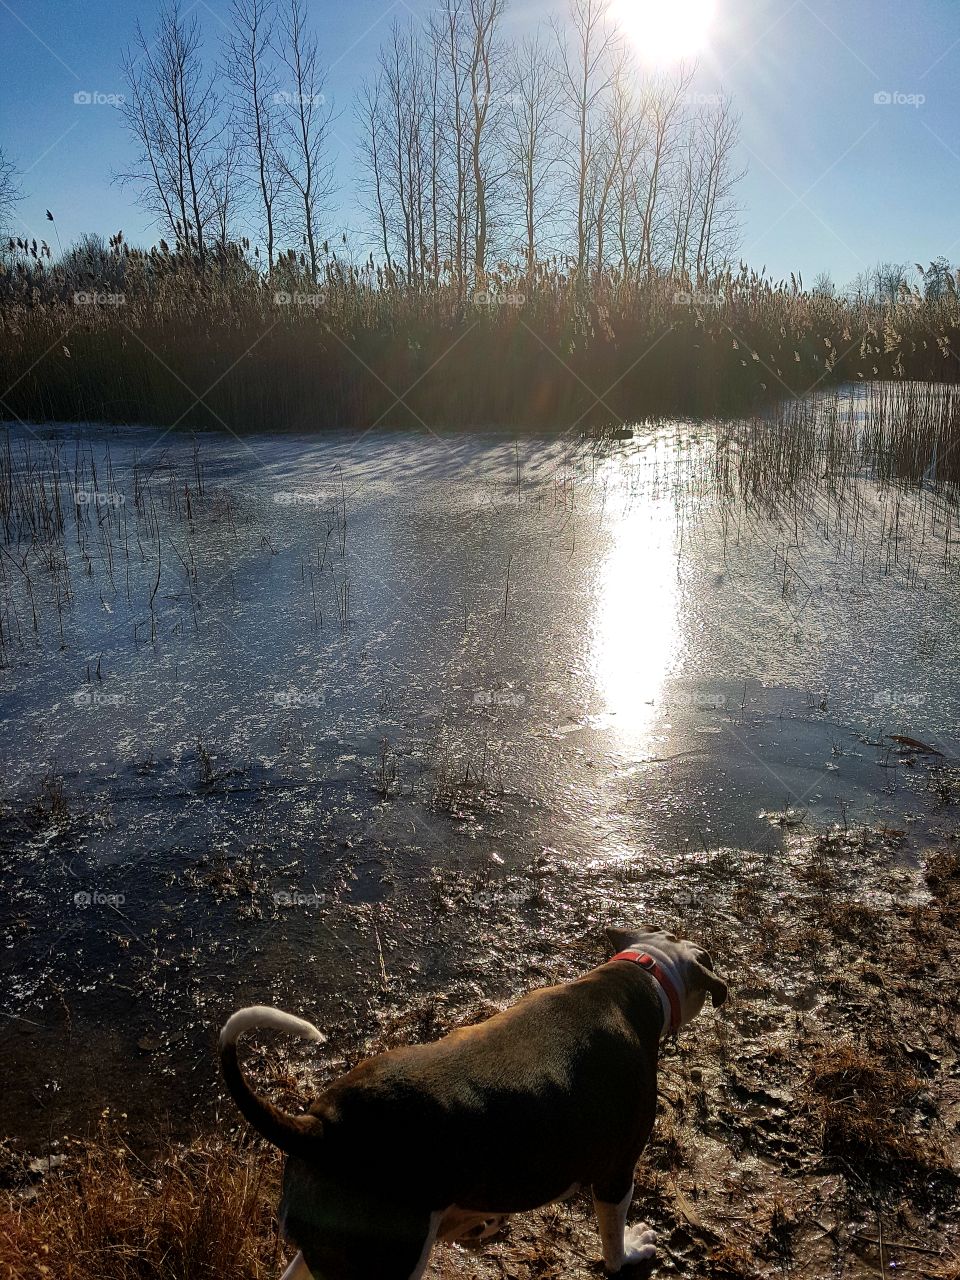 A dog and a frozen lake.